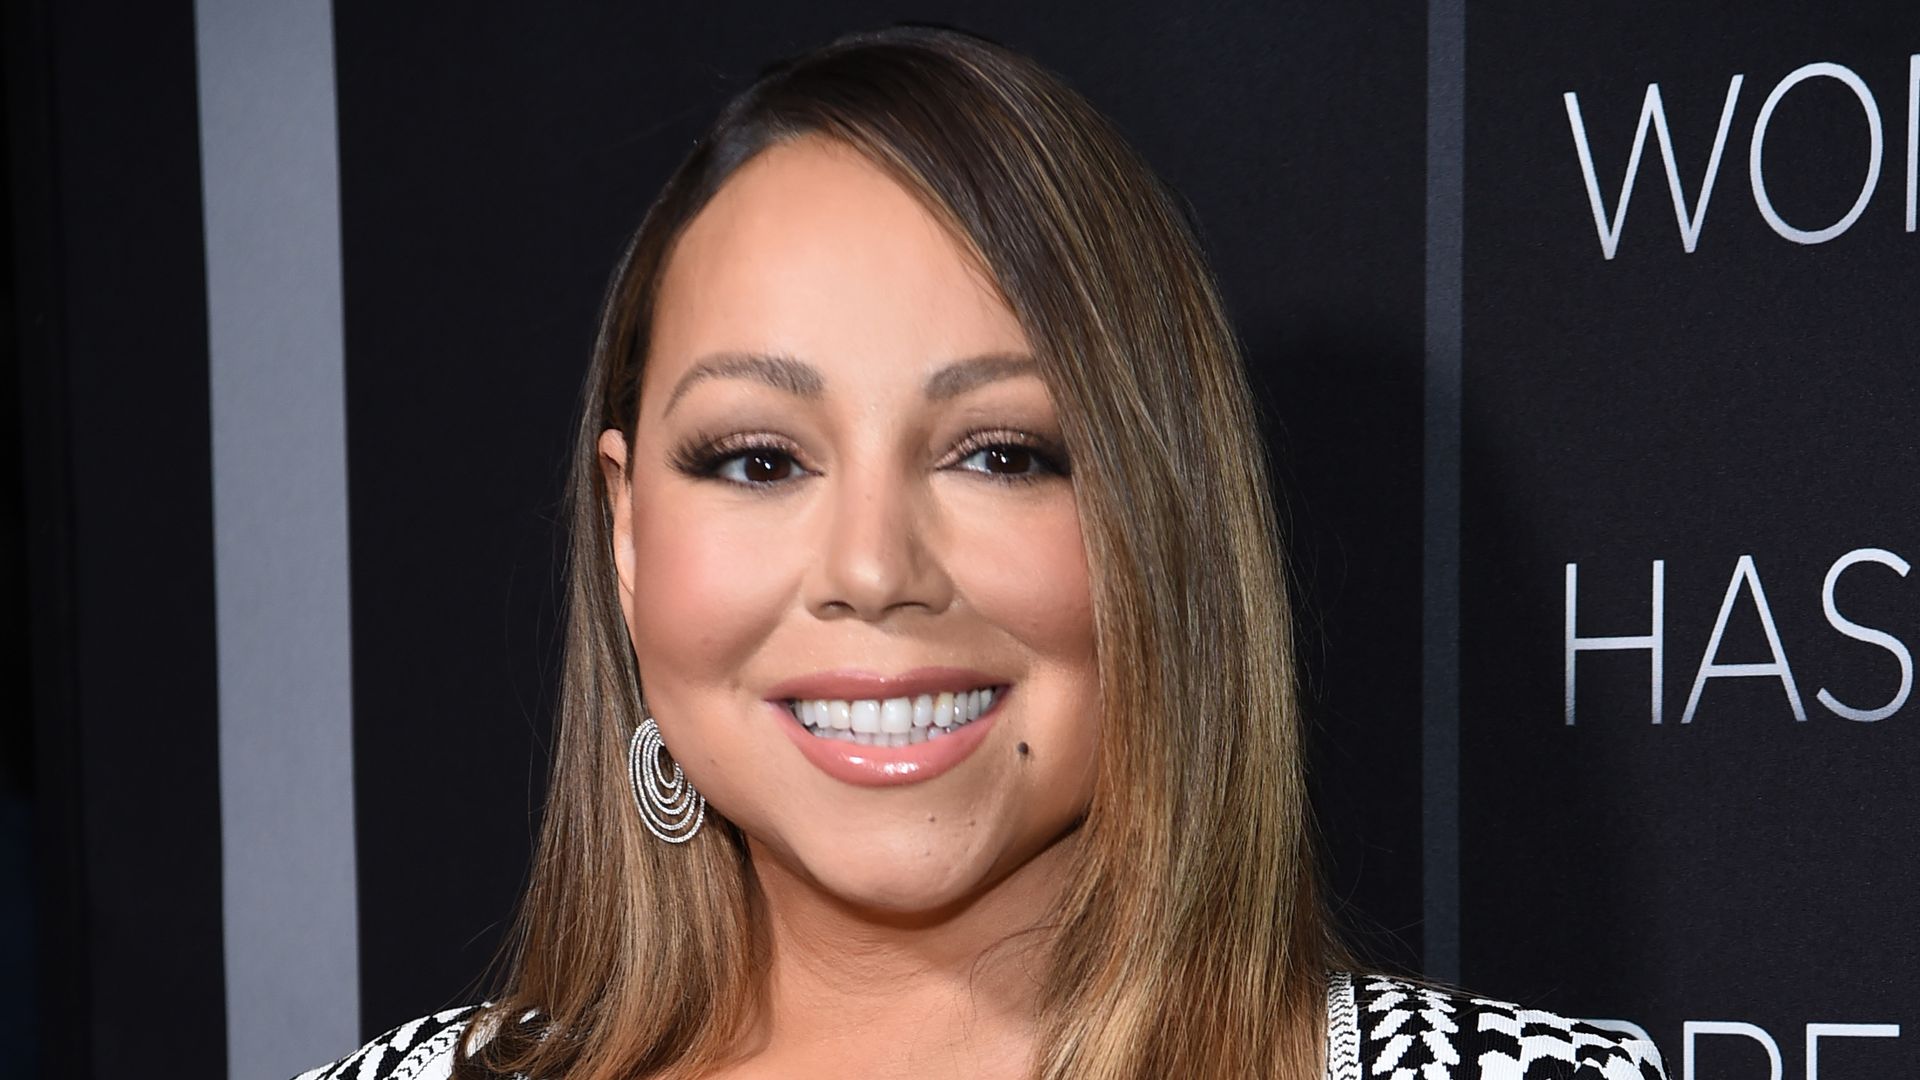 Mariah Carey attends the premiere of Tyler Perry's "A Fall From Grace" at Metrograph